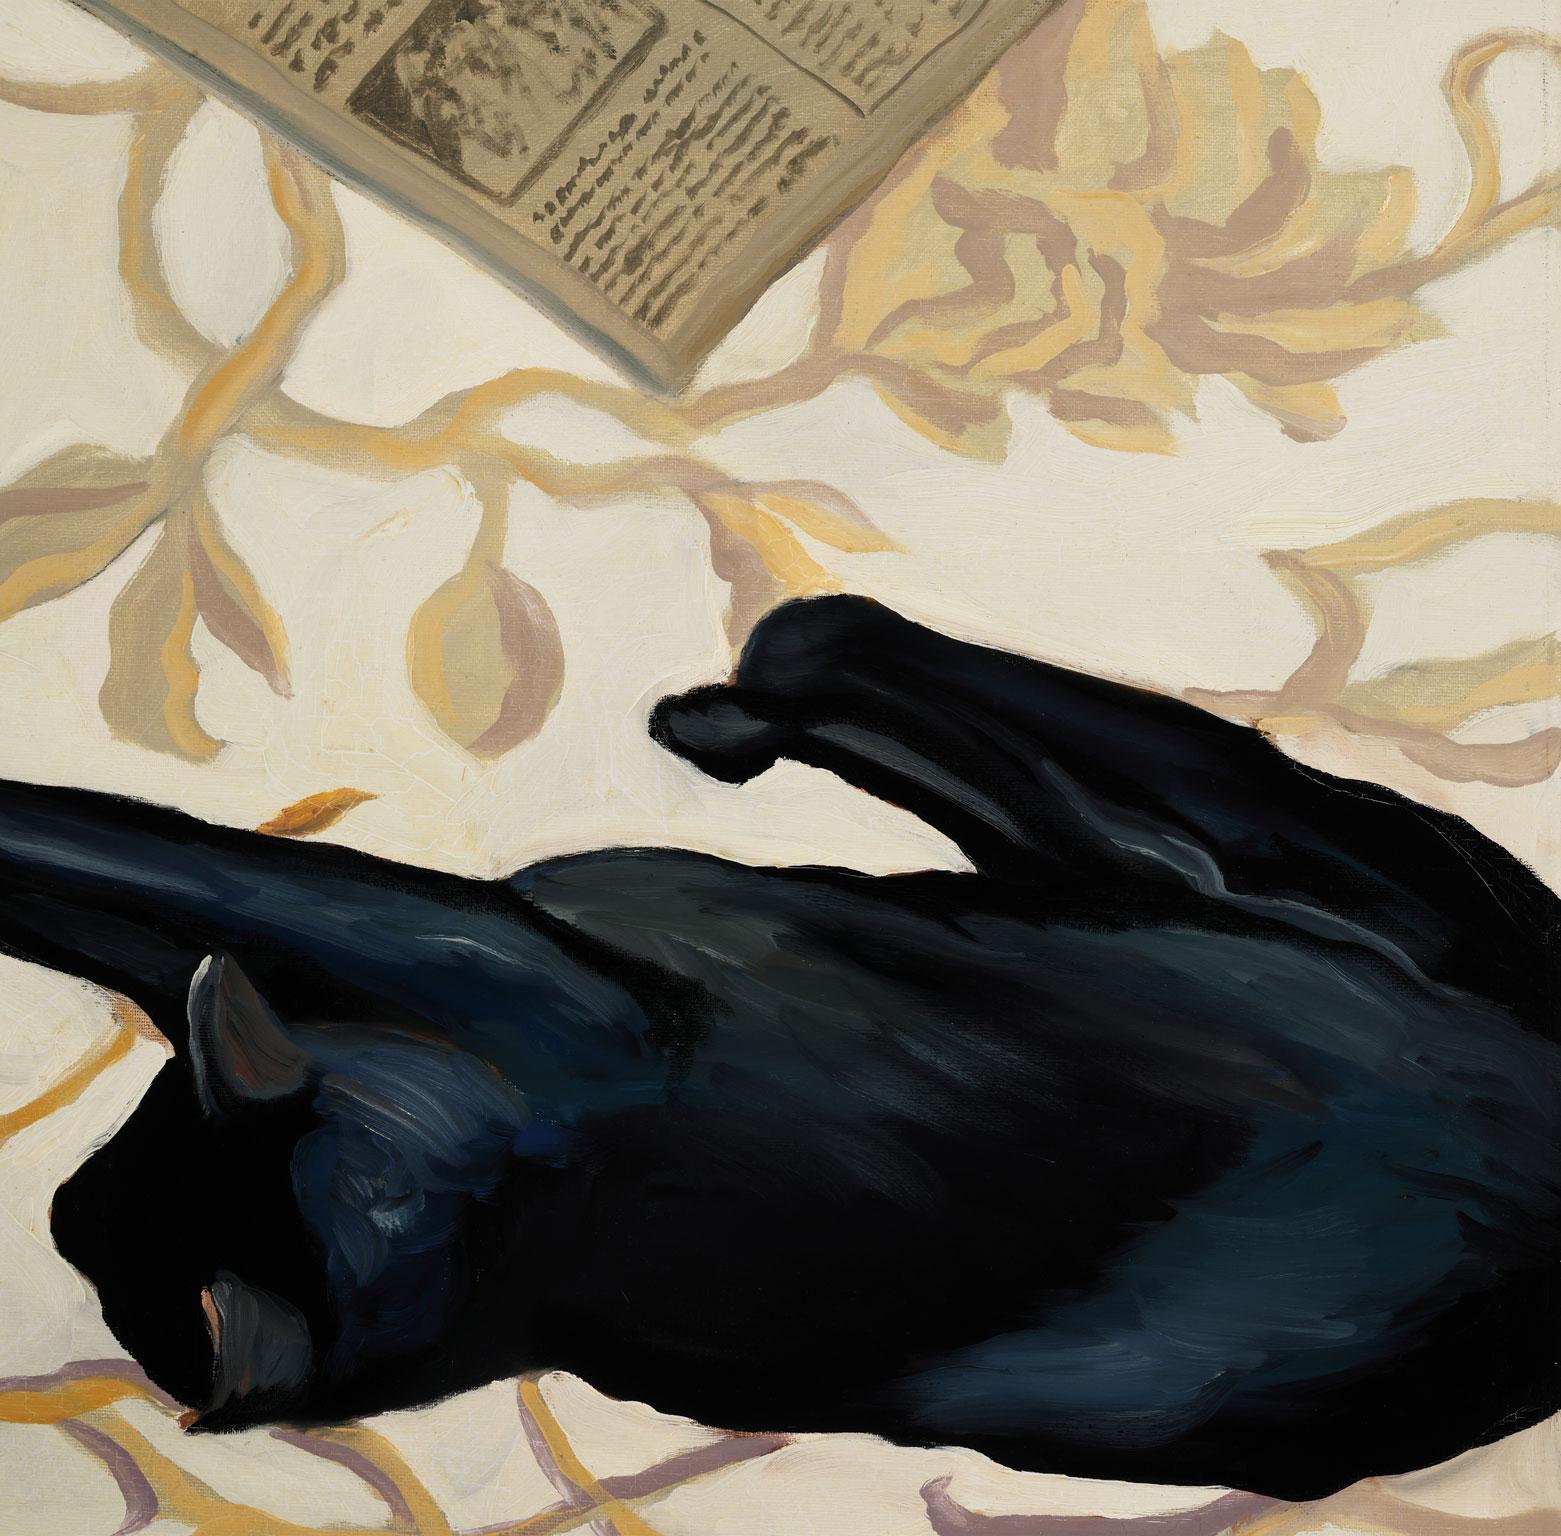 “Sleeping Cats,” an original oil on canvas by Robert K. White, is a piece for the true collector. White’s careful attention to detail and vivid use of reds, whites, browns, and blue-blacks project from the painting, immediately capturing the